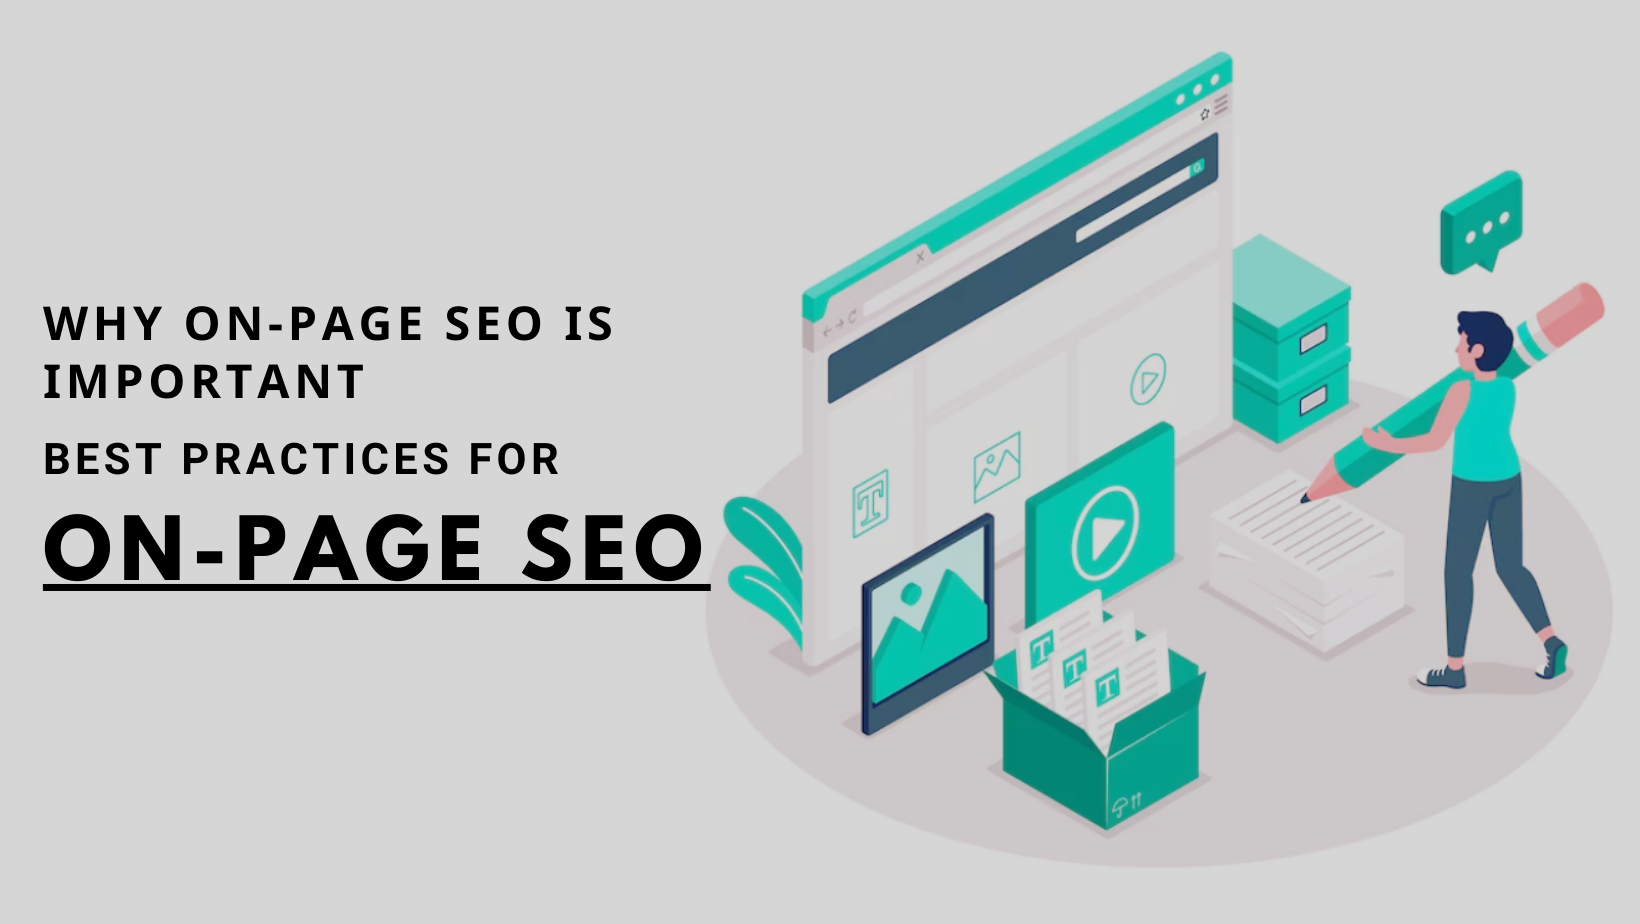 Best Practices for On-Page SEO